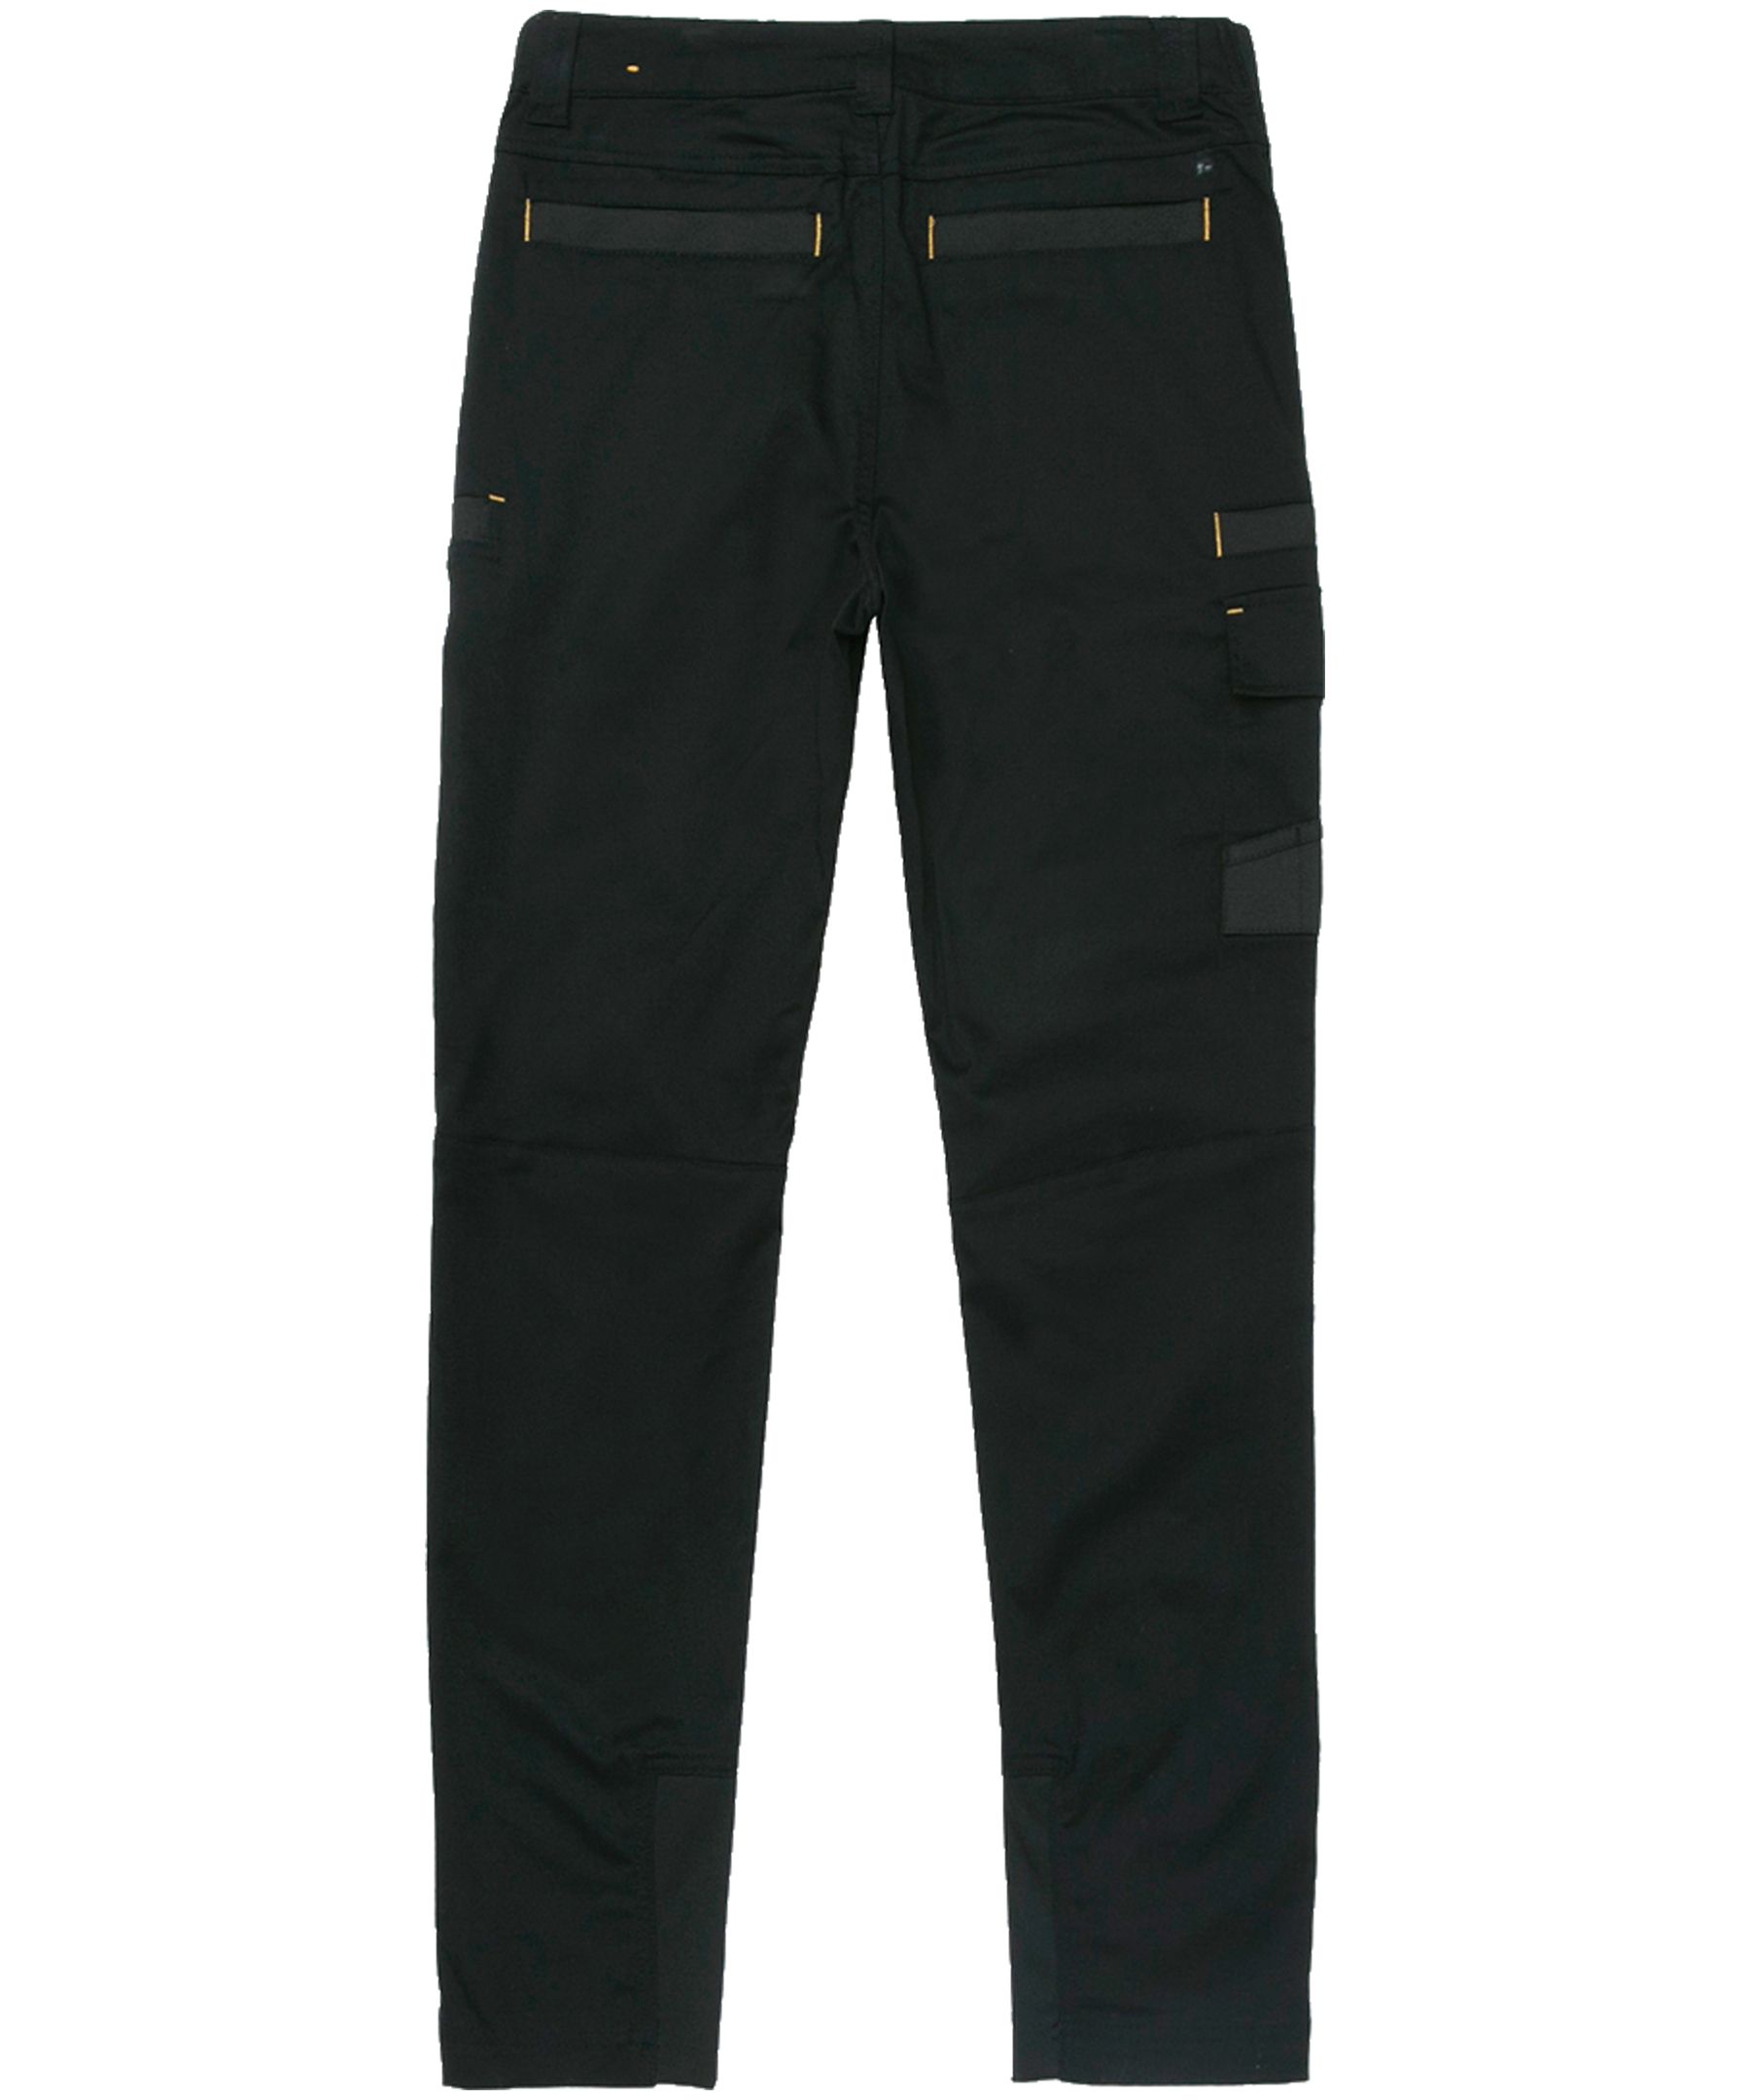 Helly Hansen Workwear 77441 Chelsea Evolution Construction Trouser -  Clothing from MI Supplies Limited UK